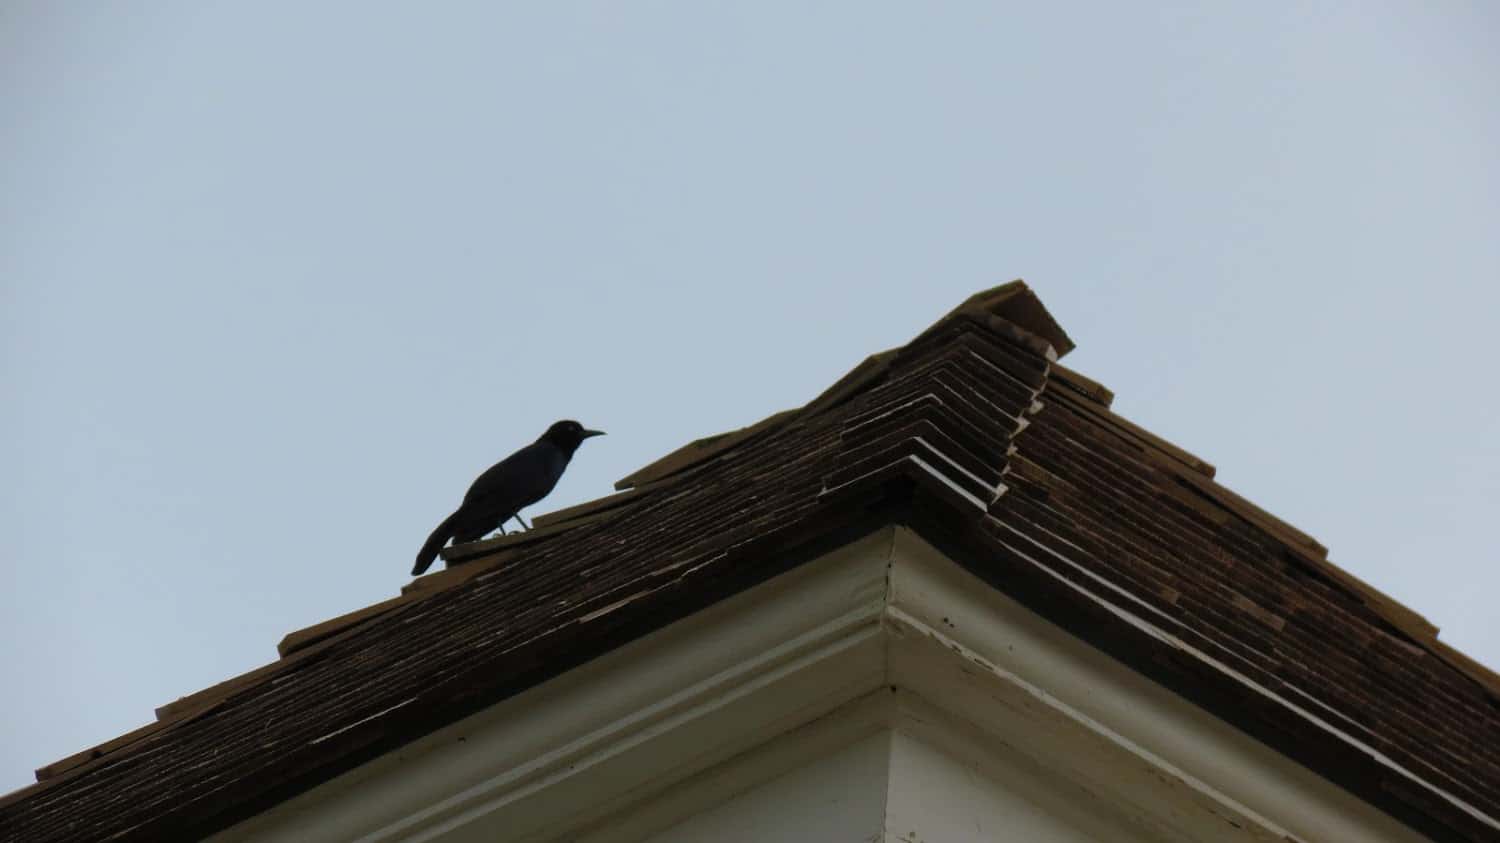 crow on the roof